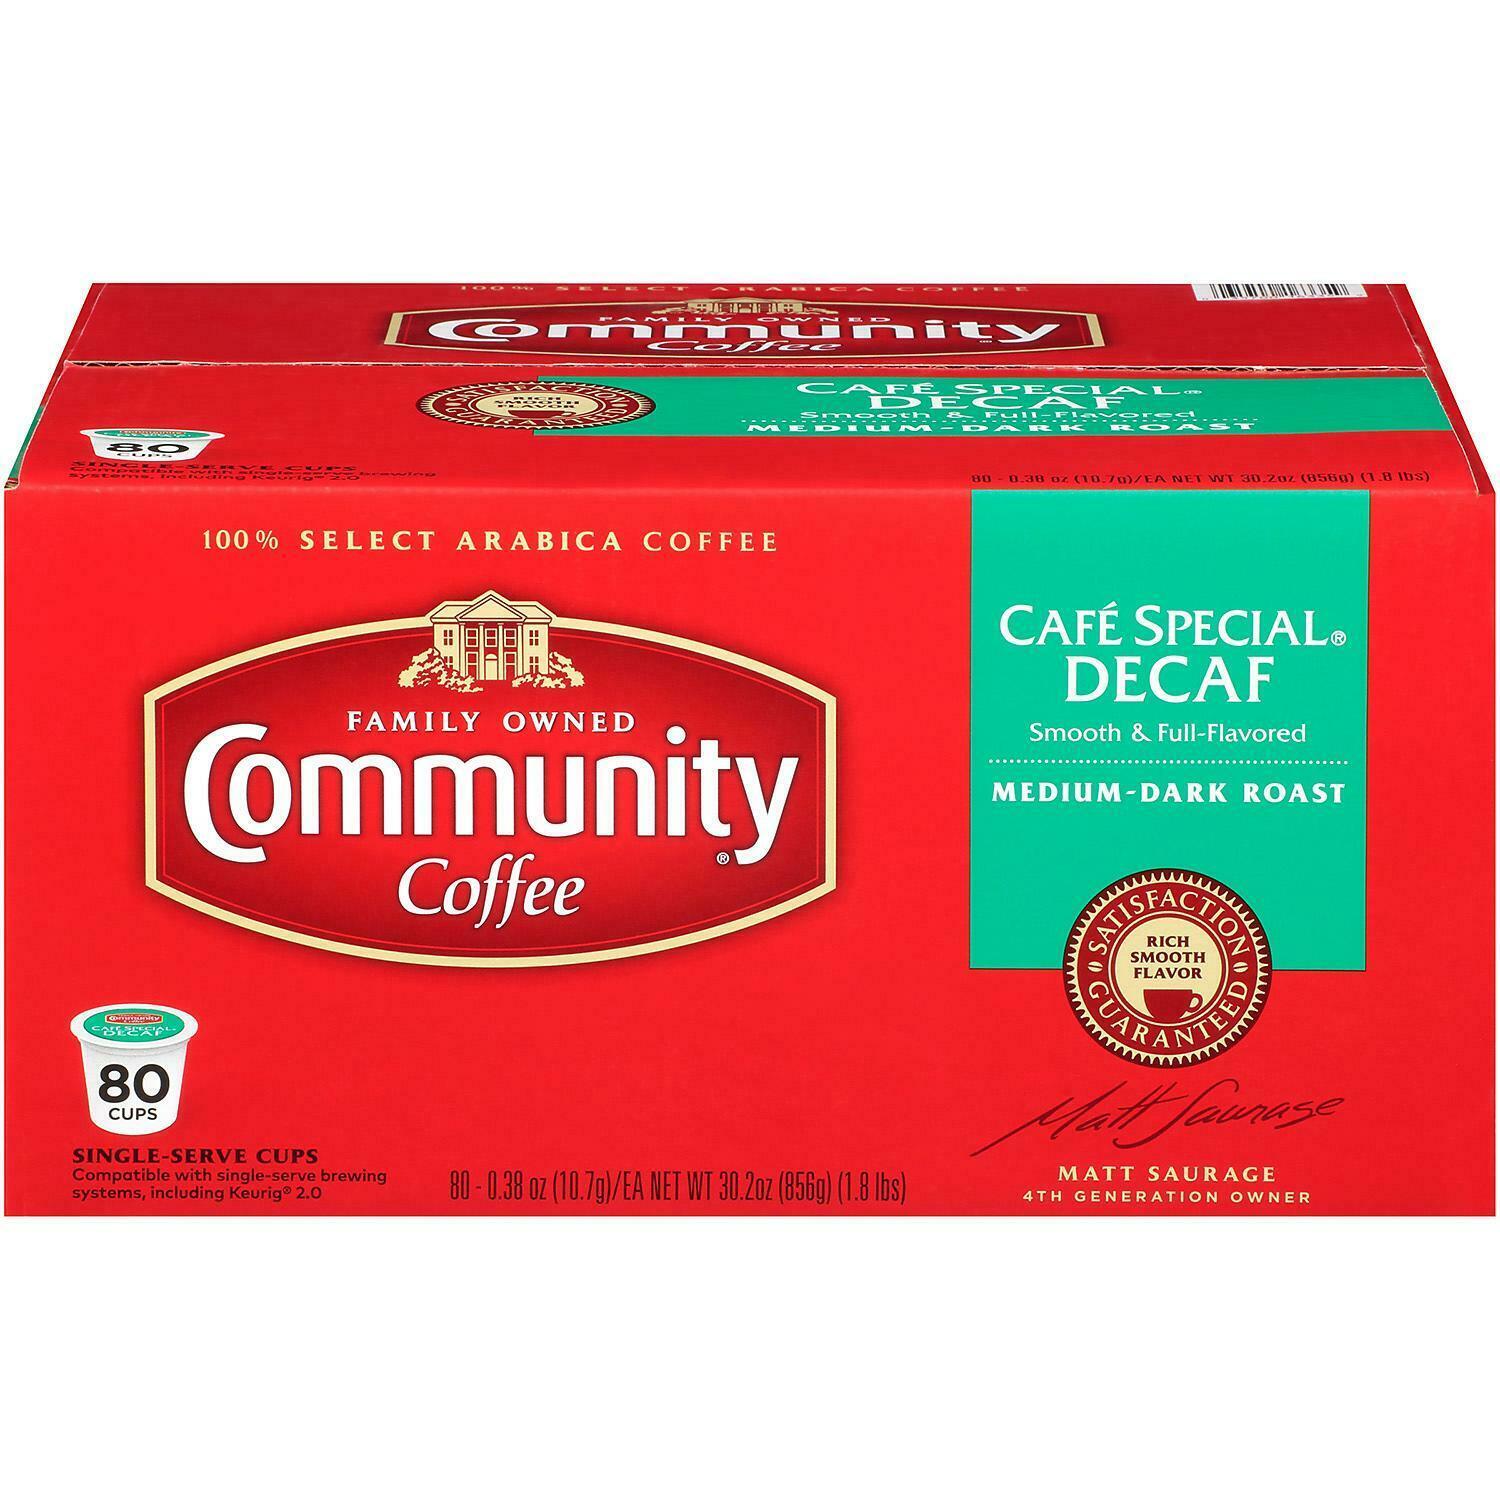 Community Coffee Cafe Special DECAF Coffee 80 to 320 Keurig K cups FREE SHIPPING - $64.89 - $209.88